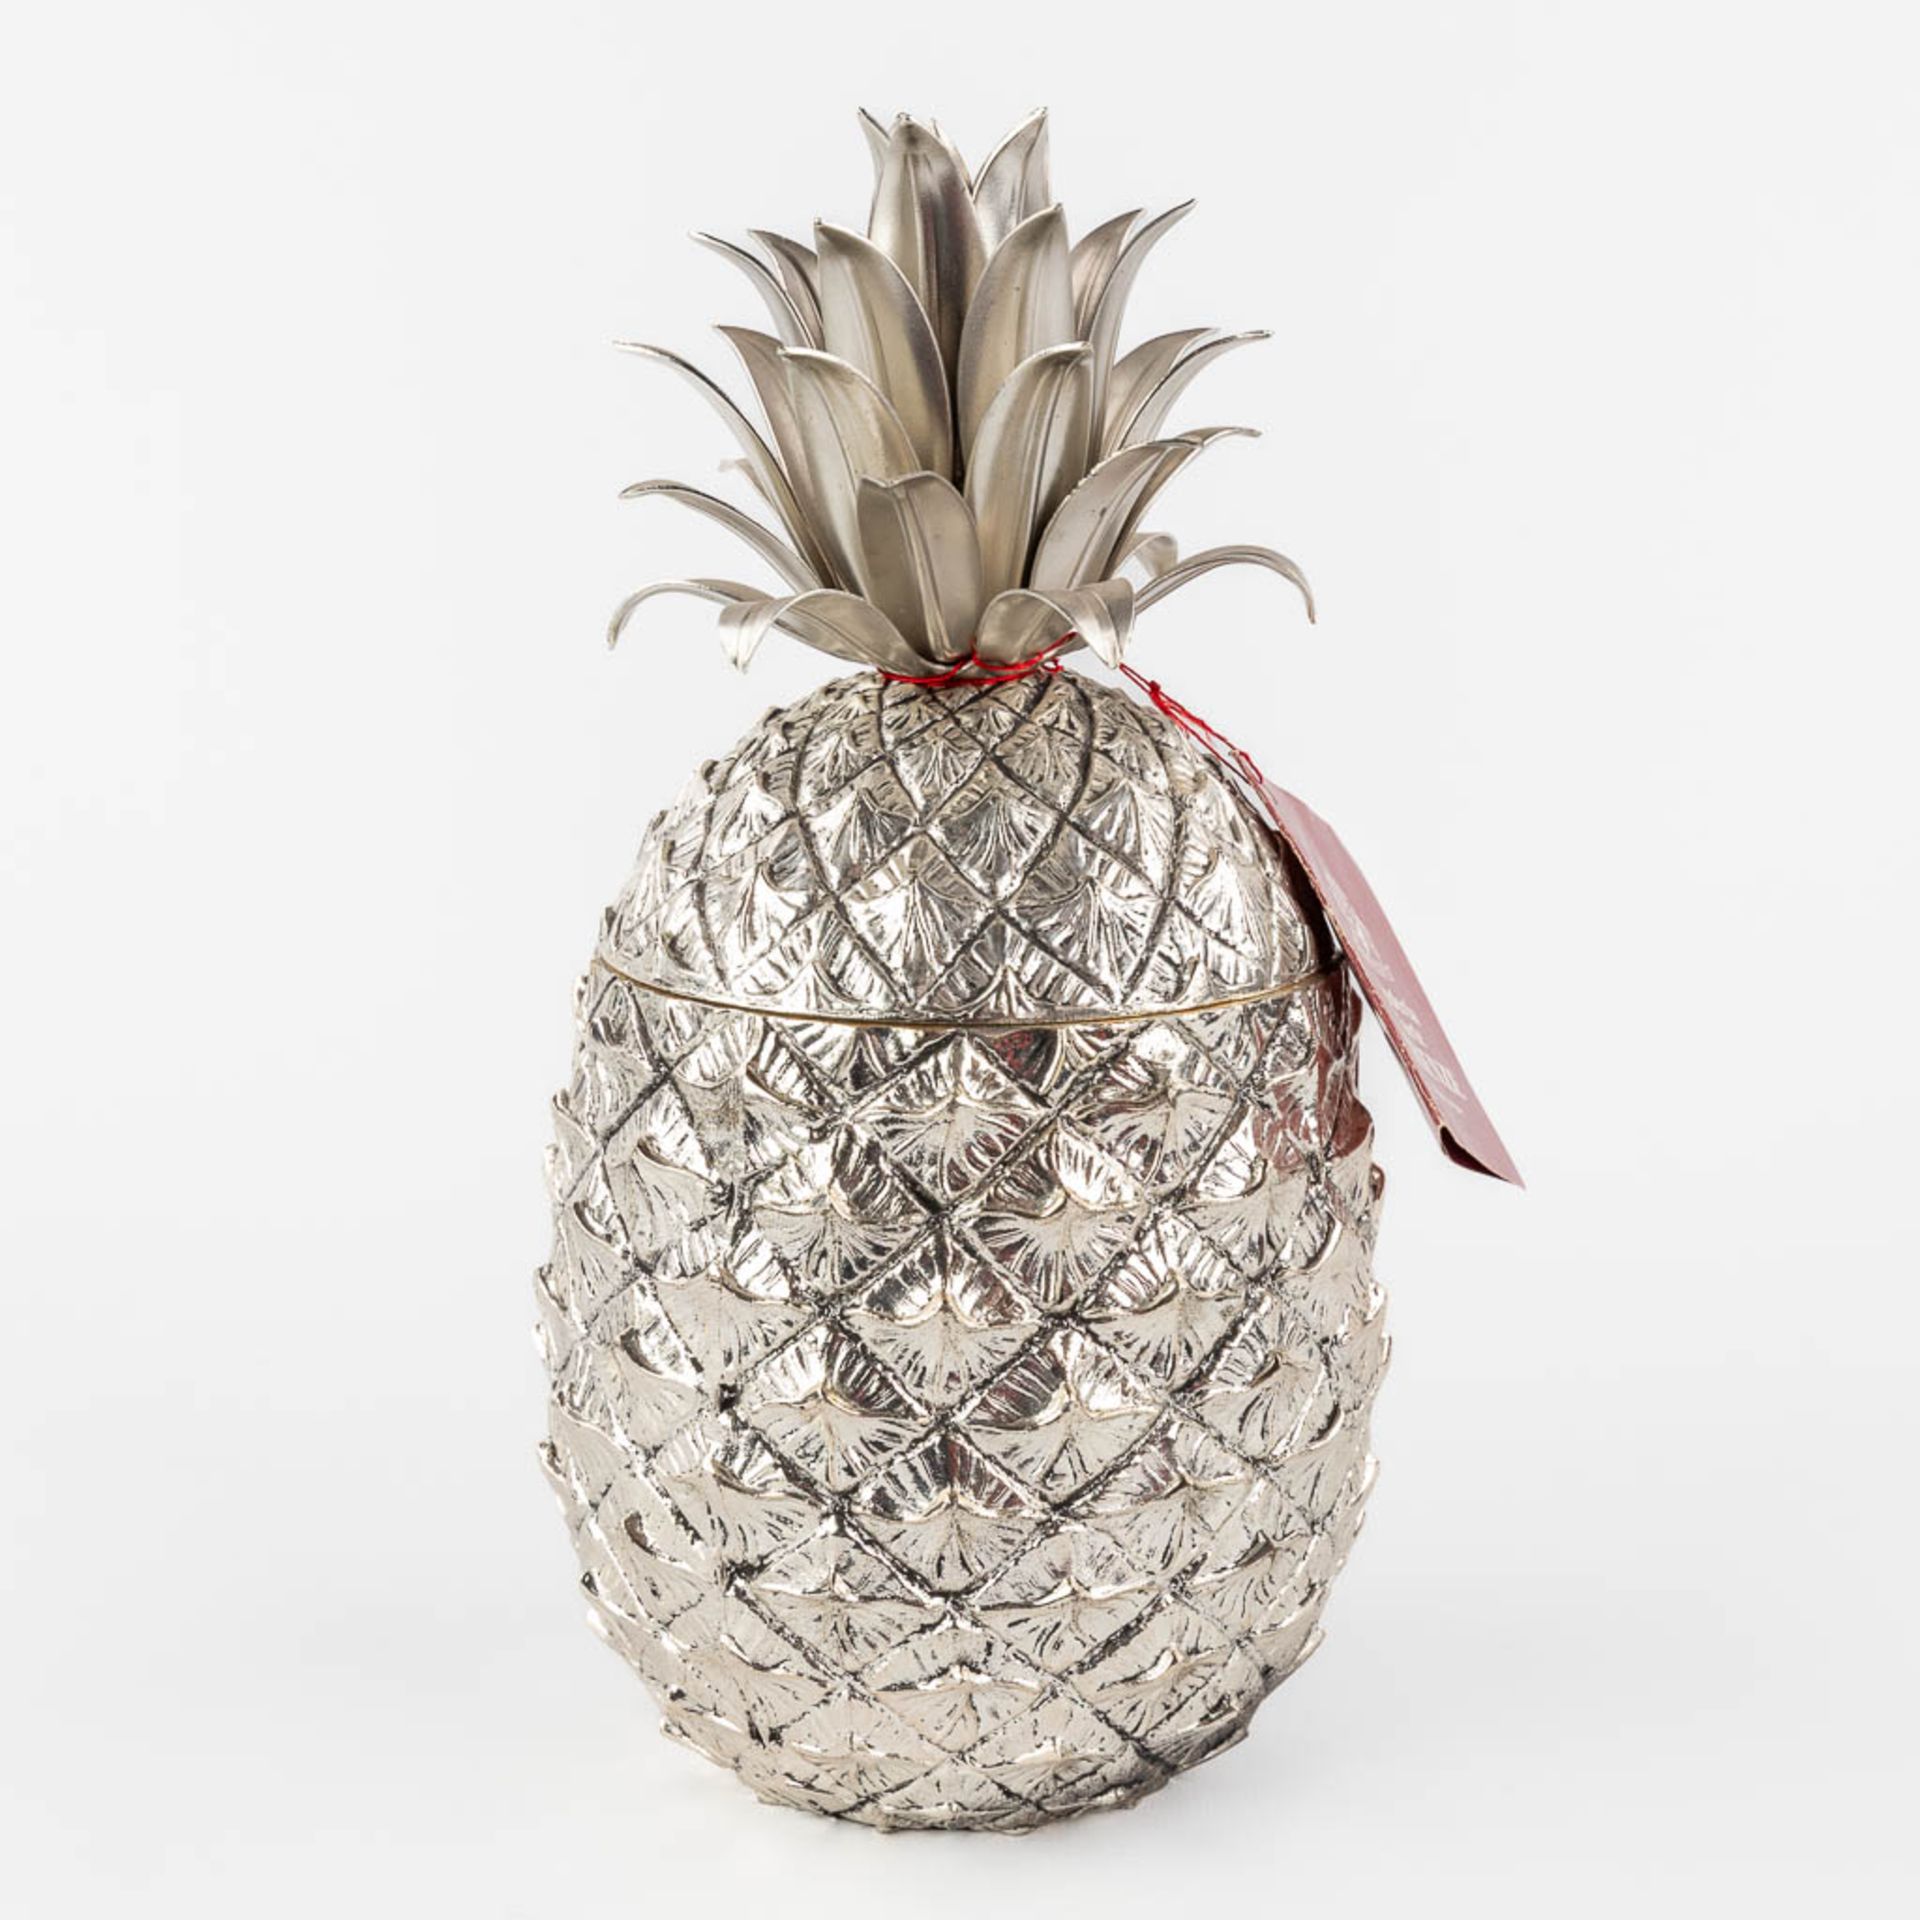 Mauro MANETTI (XX) 'Pineapple' an ice pail. Italy, 20th C. (H:26 x D:14 cm) - Image 3 of 10